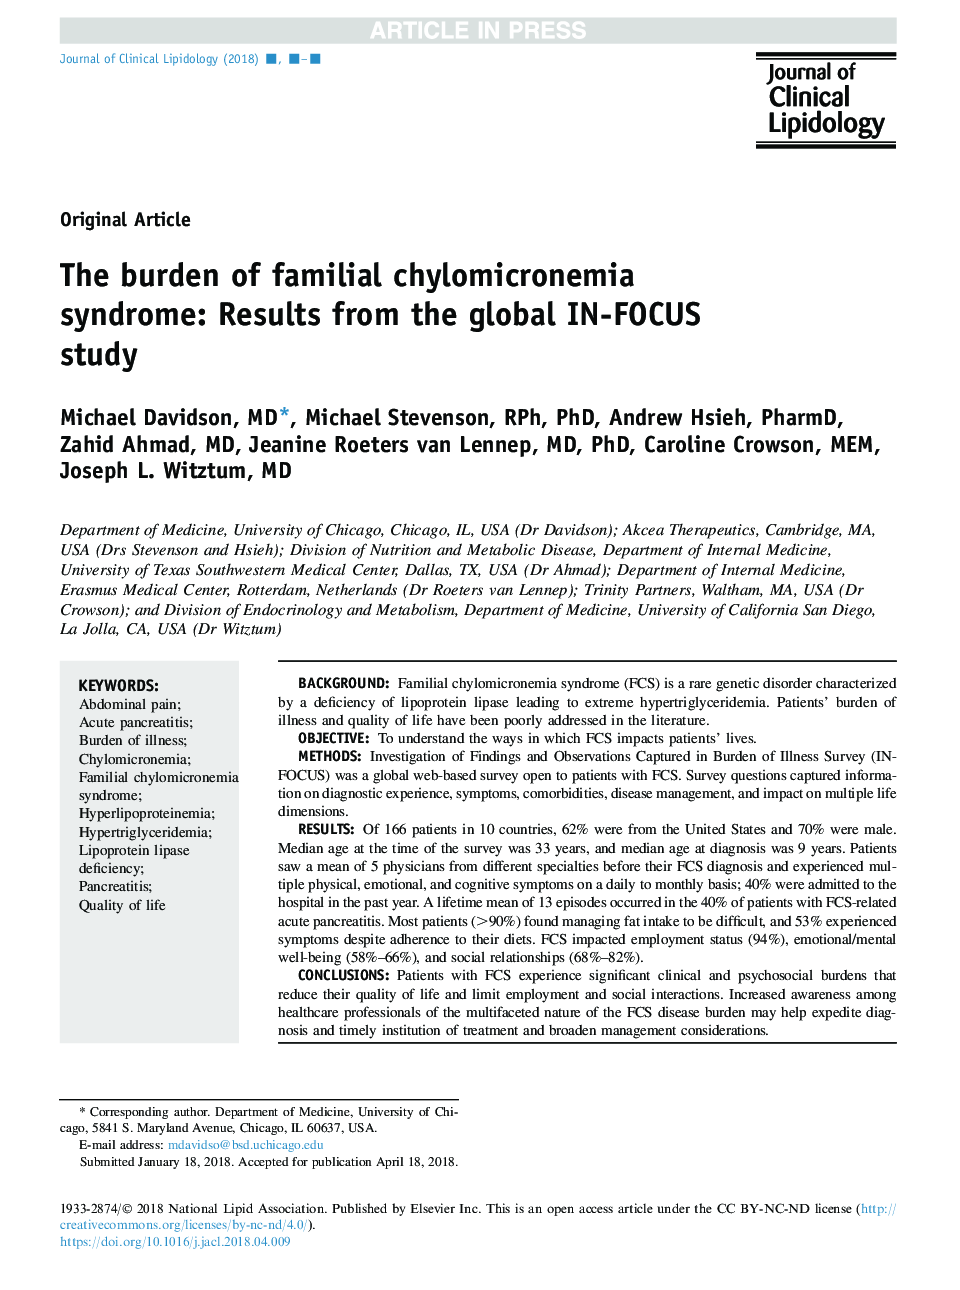 The burden of familial chylomicronemia syndrome: Results from the global IN-FOCUS study